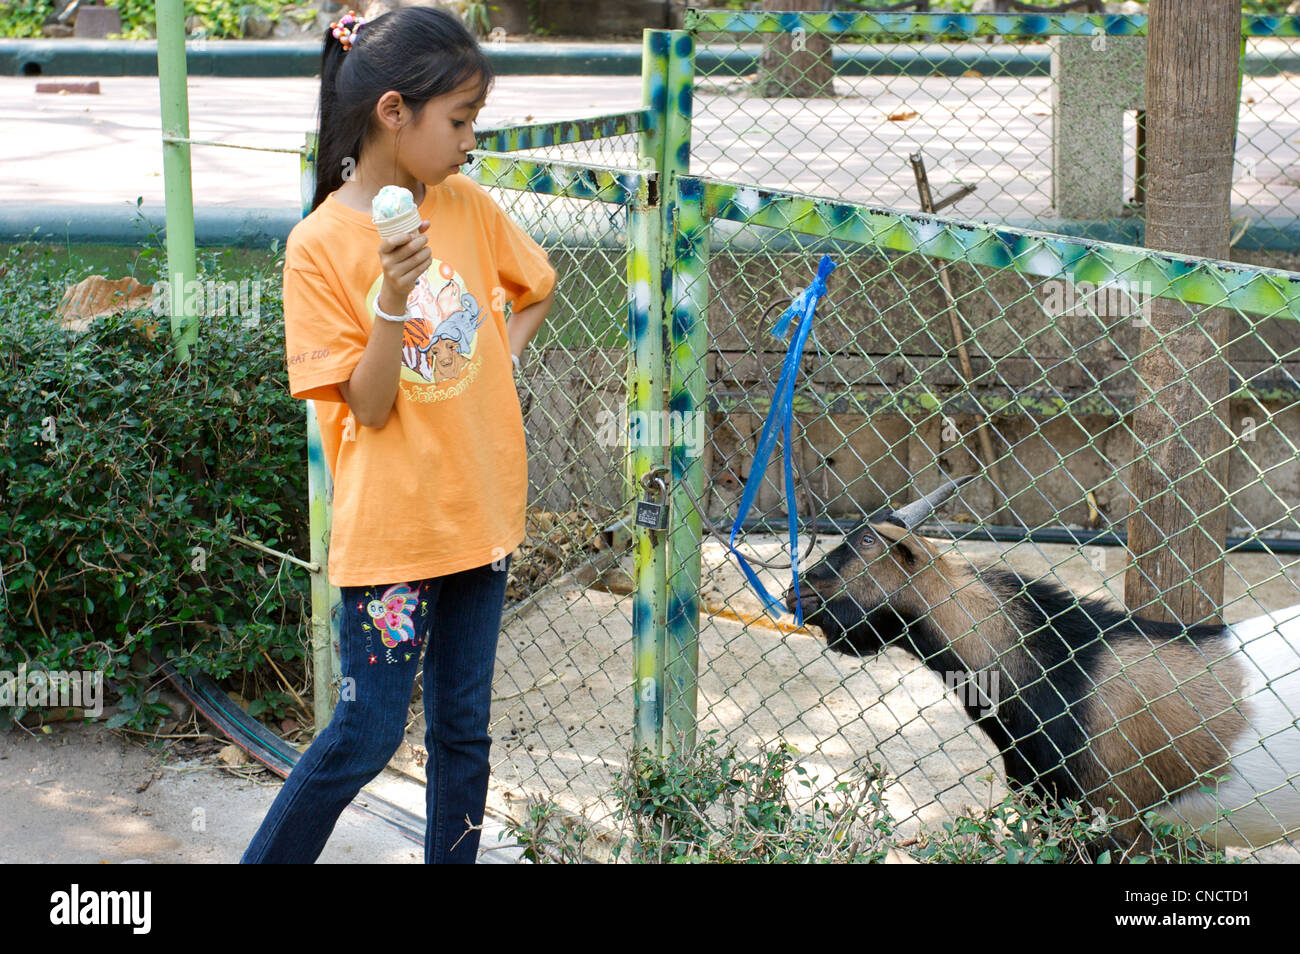 girl having ice cream looking at goat in cage, Chinag mai zoo,Thaialnd Stock Photo